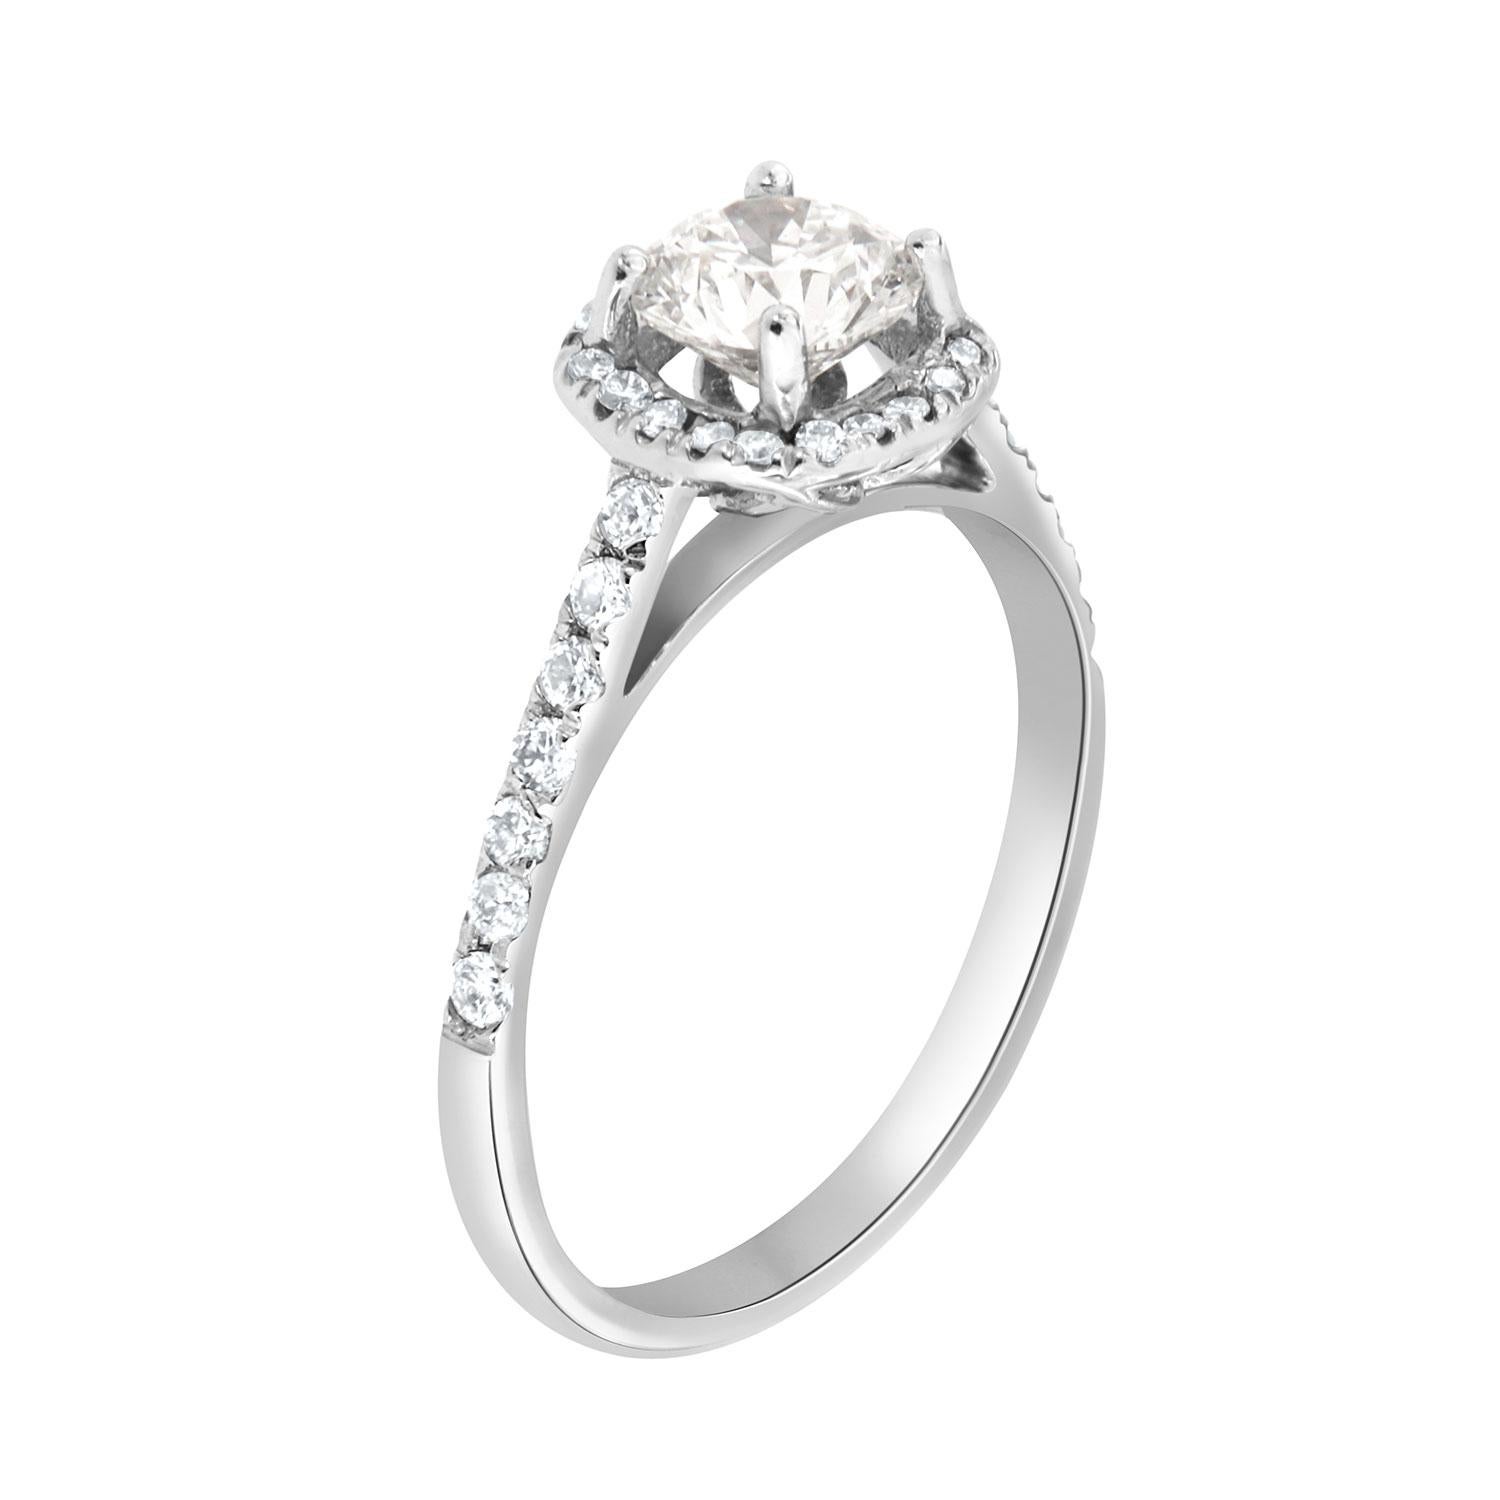 This Petite Cushion Shaped halo ring features perfectly matched brilliant round diamonds 1.3 mm each Micro-Prong set on a 1.7 mm wide shank. In the center of this sparkly ring is set one round diamond 0.70- Carat, E color VVS2 in clarity GIA